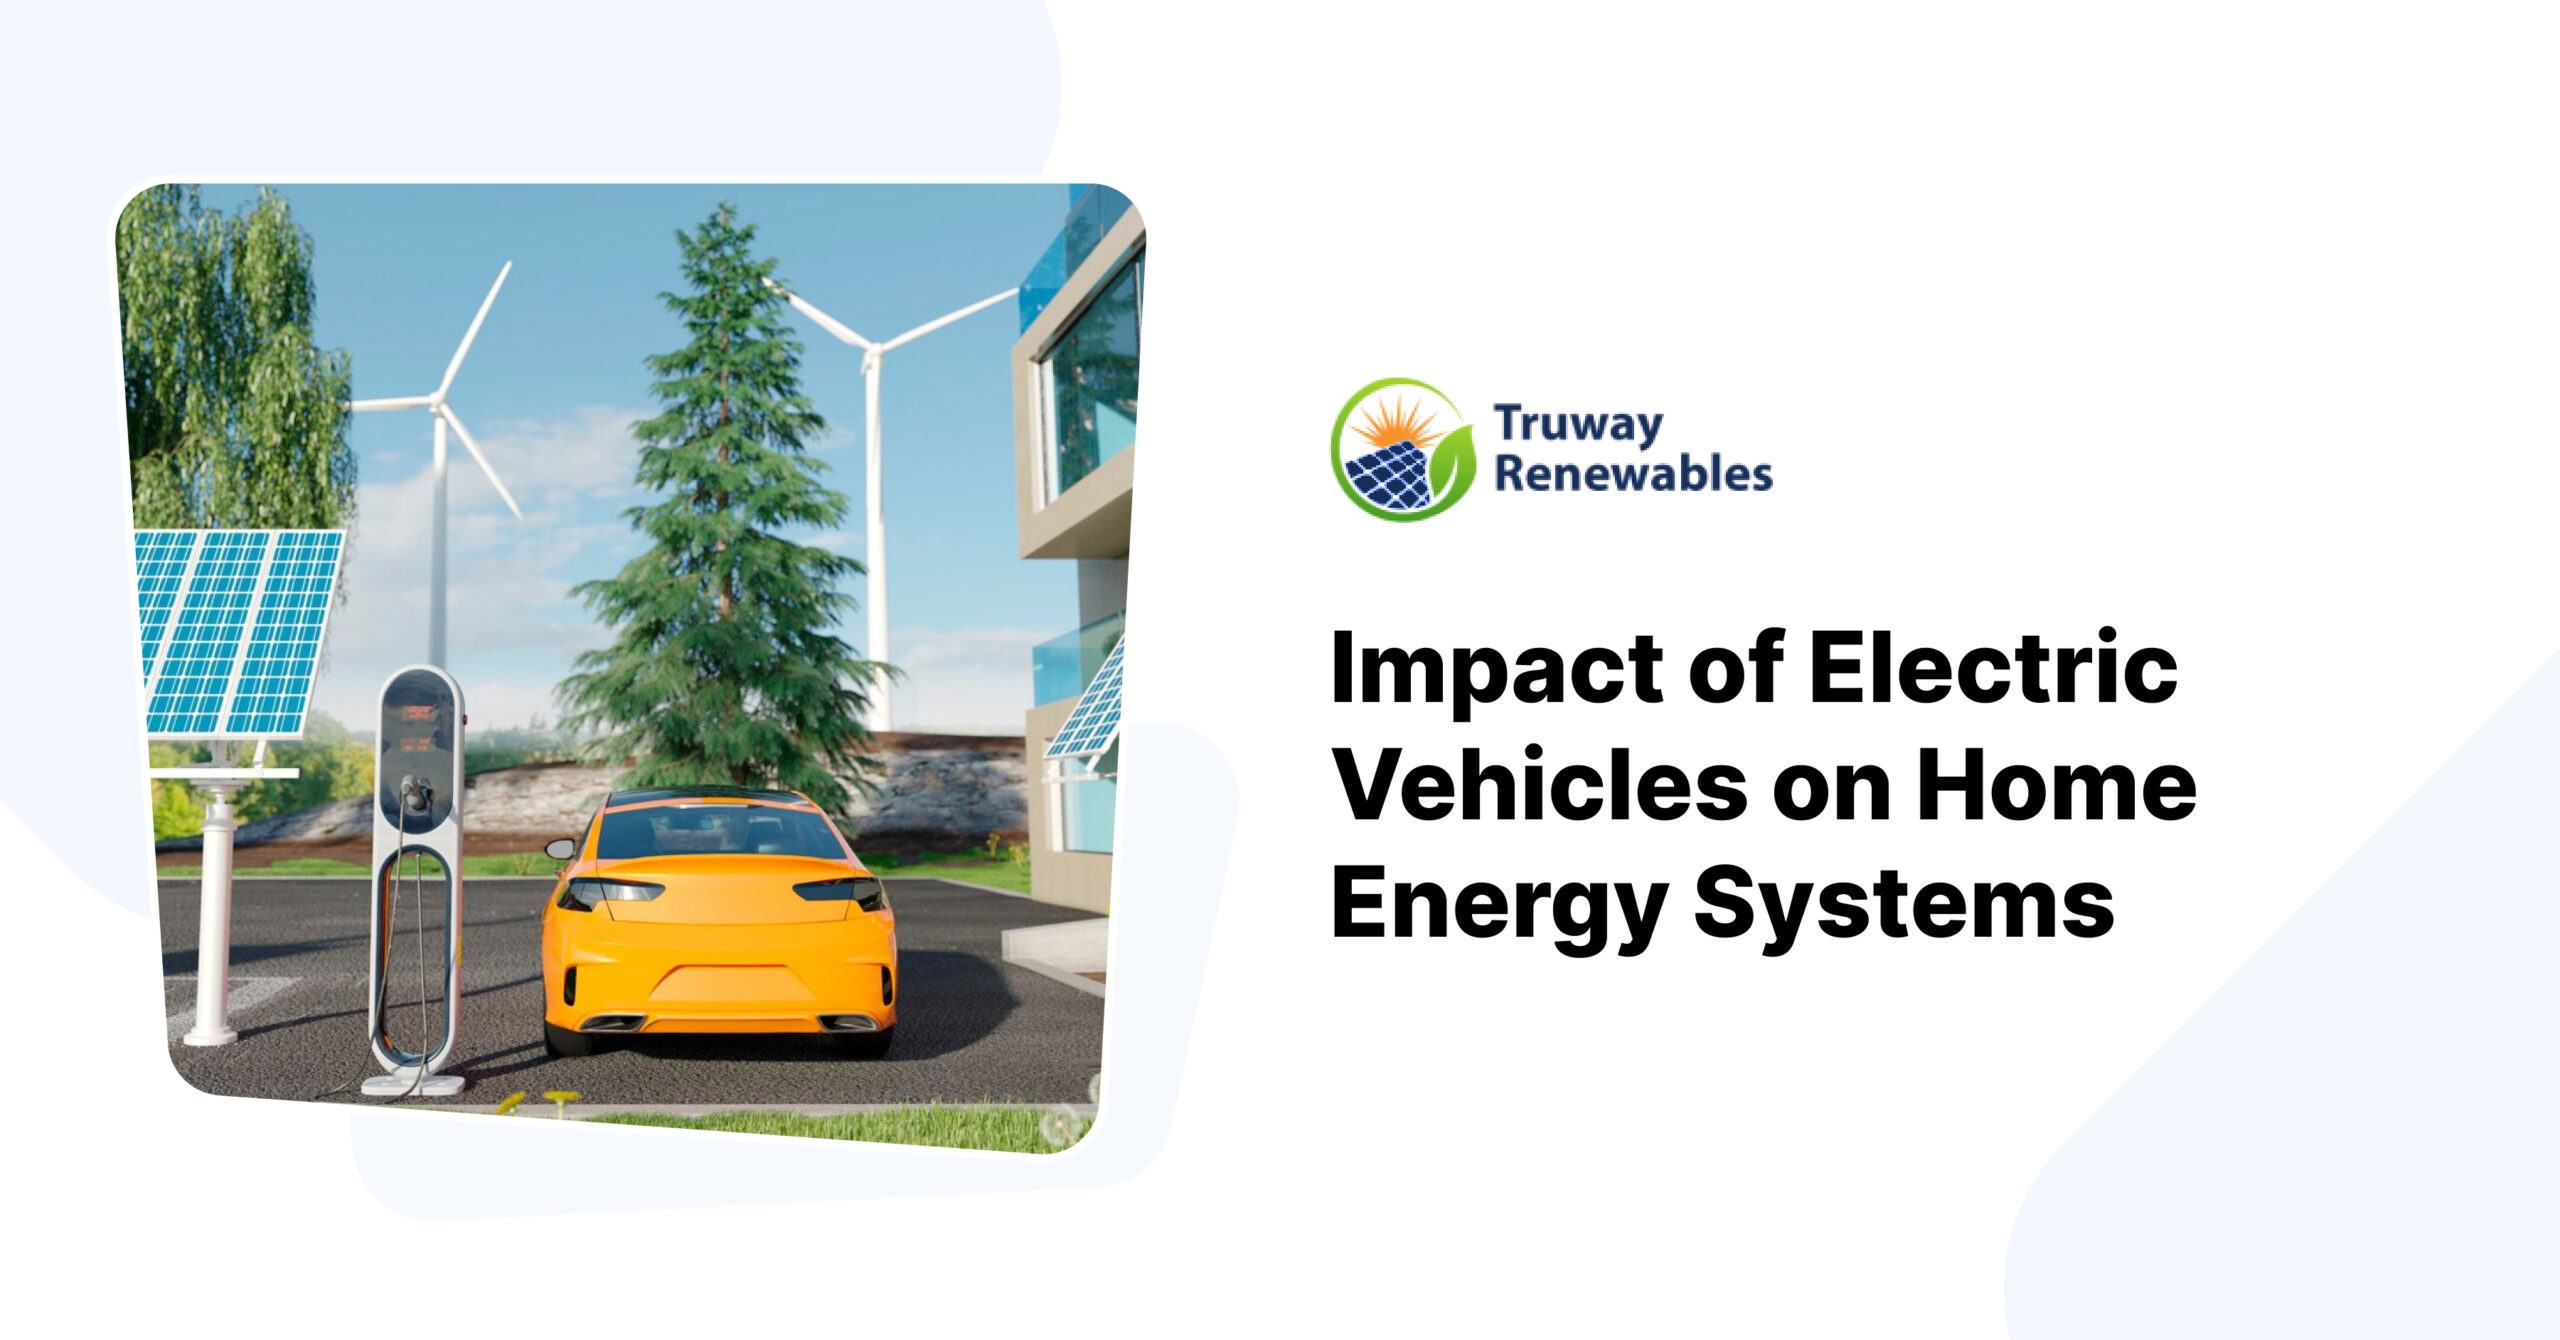 Impact of Electric Vehicles on Home Energy Systems